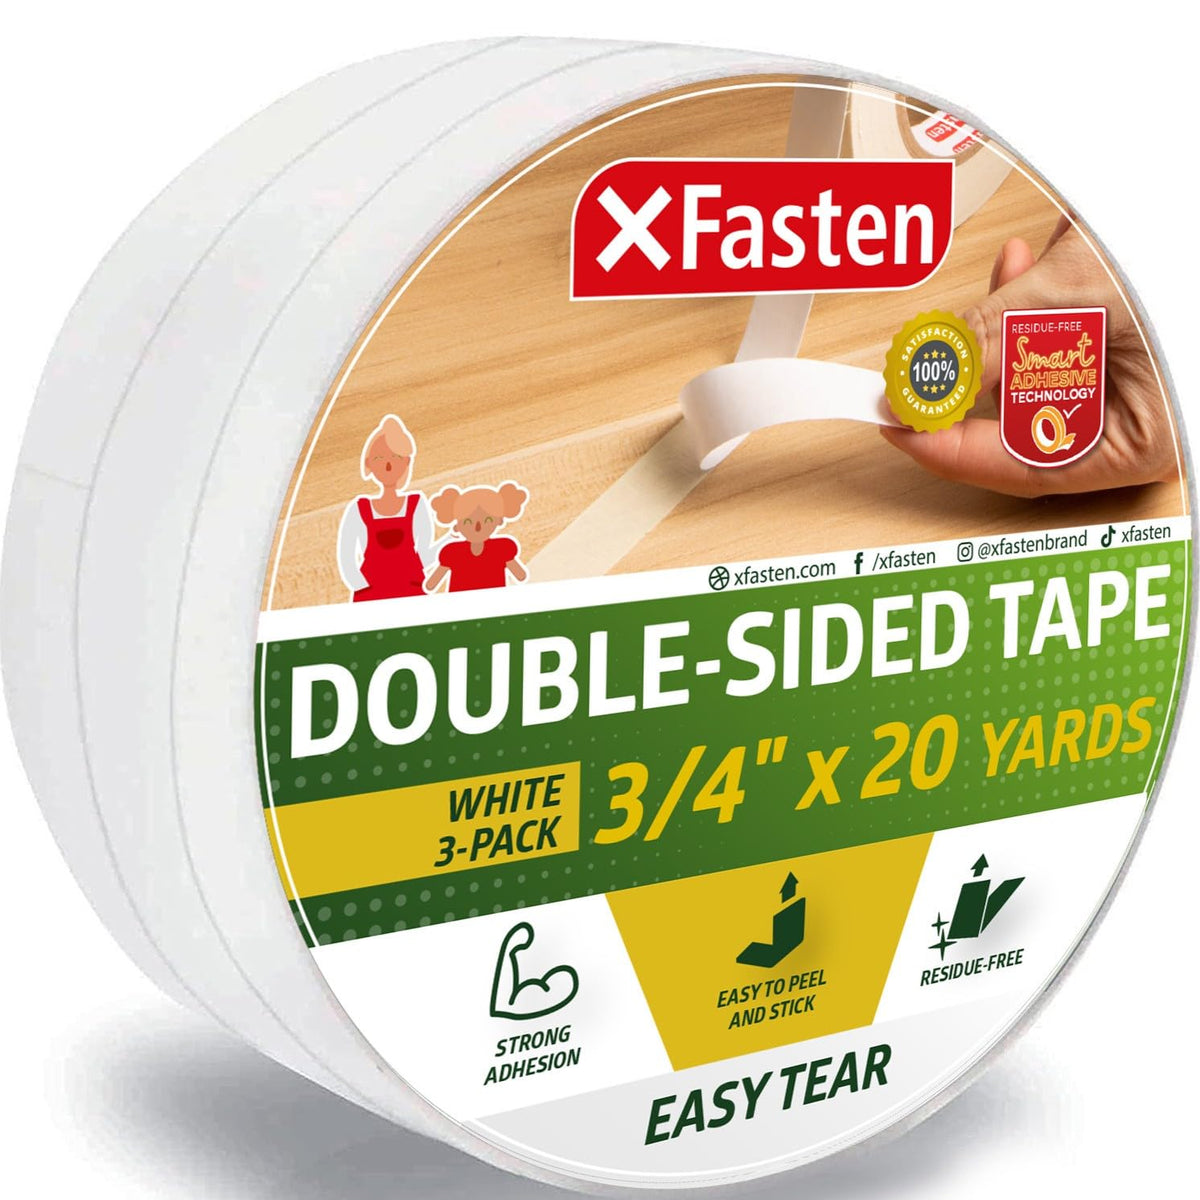 XFasten Double Sided Woodworking Tape, 1-Inch by 36-Yards, 3-Pack - Double Face Woodworker Turner's Tape for Wood Template, Removable & Residue Free